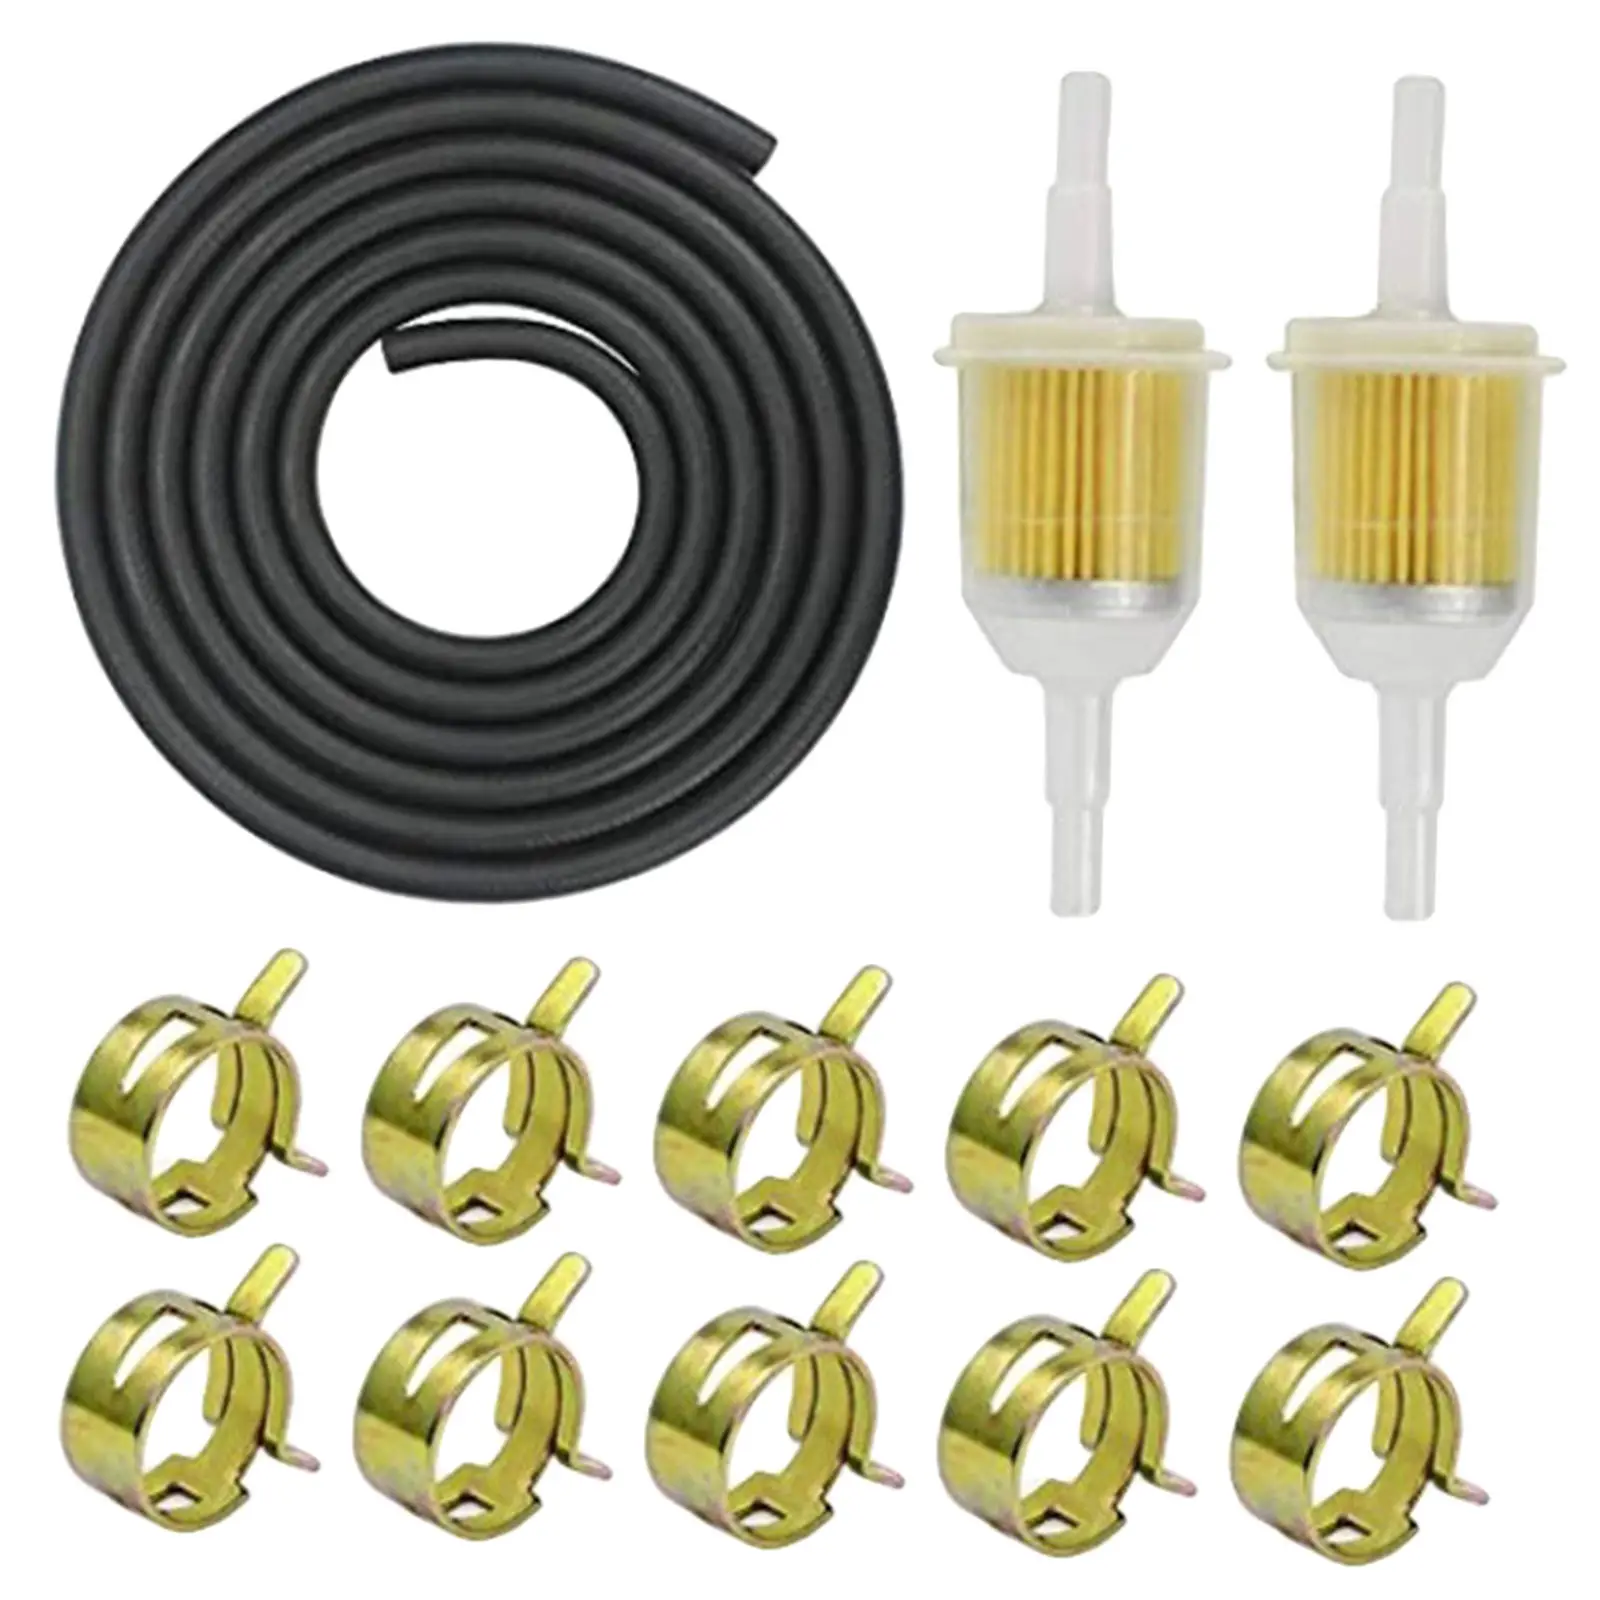 Fuel Line Hose Set 10Pieces Hose Clamps for Small Tractors Lawn Mowers Motorcycles Weight Machines Accessories Parts